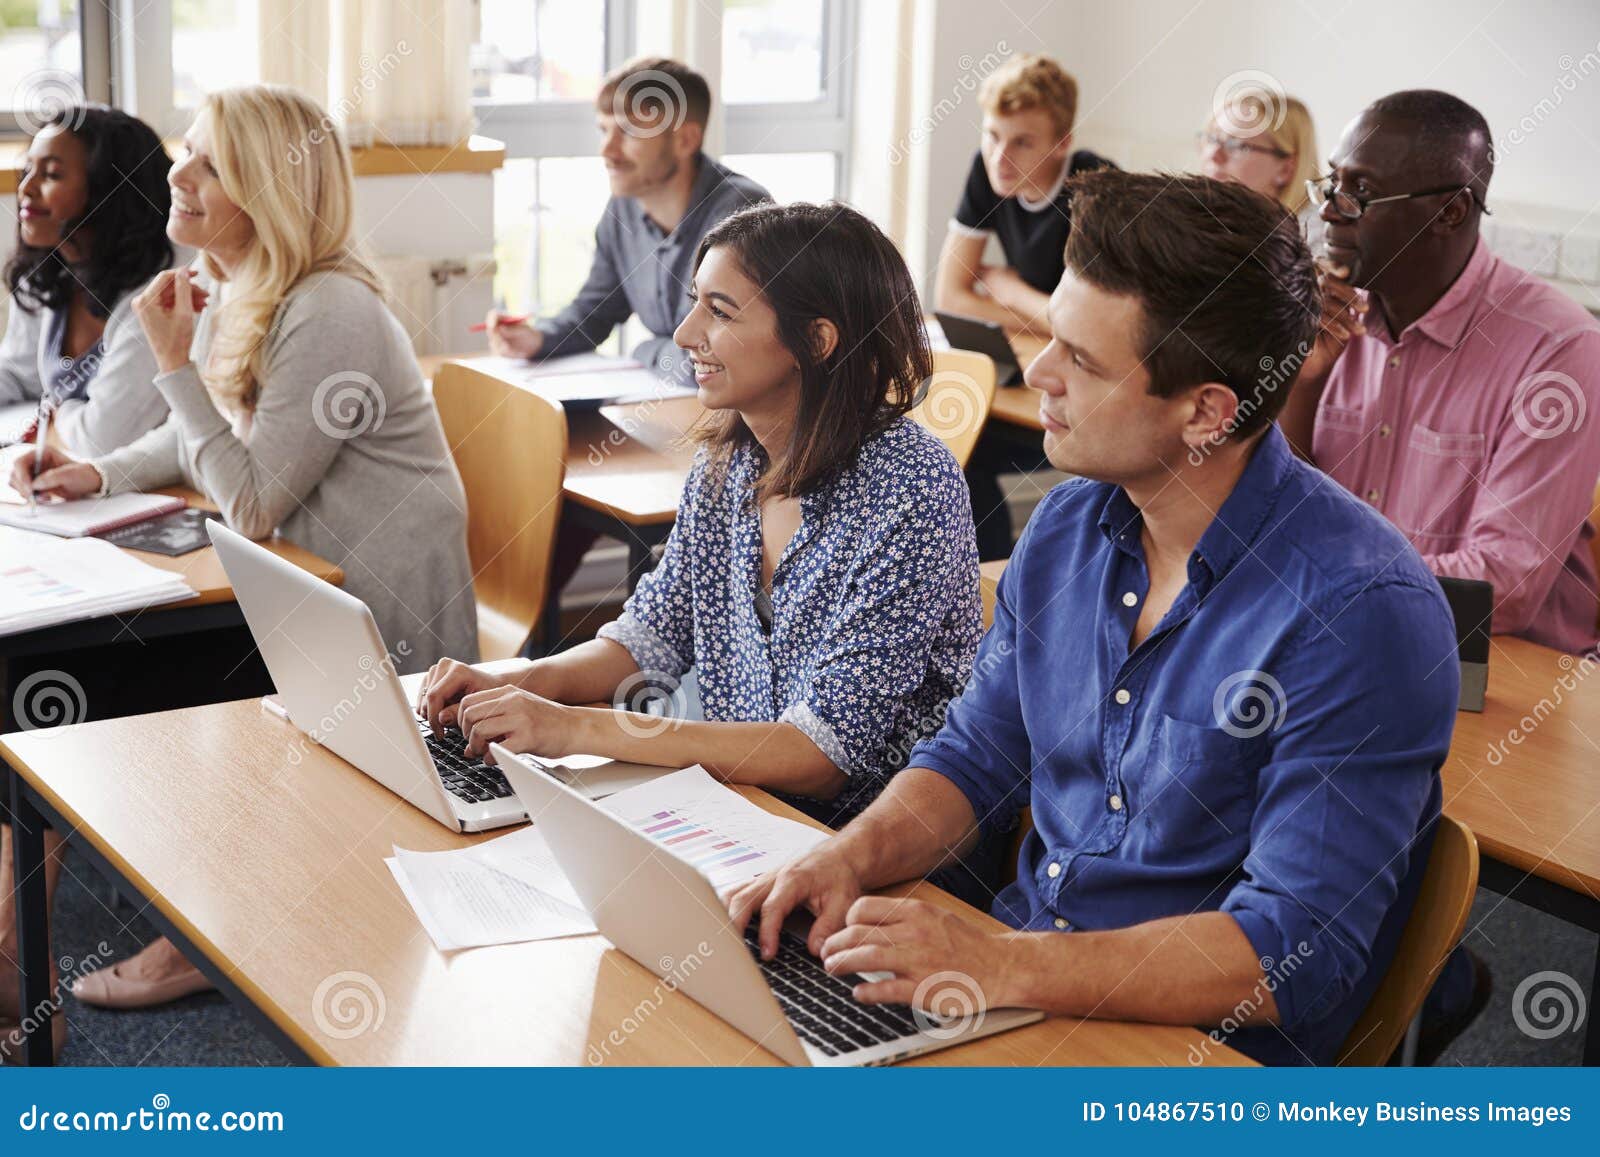 mature students sitting at desks in adult education class